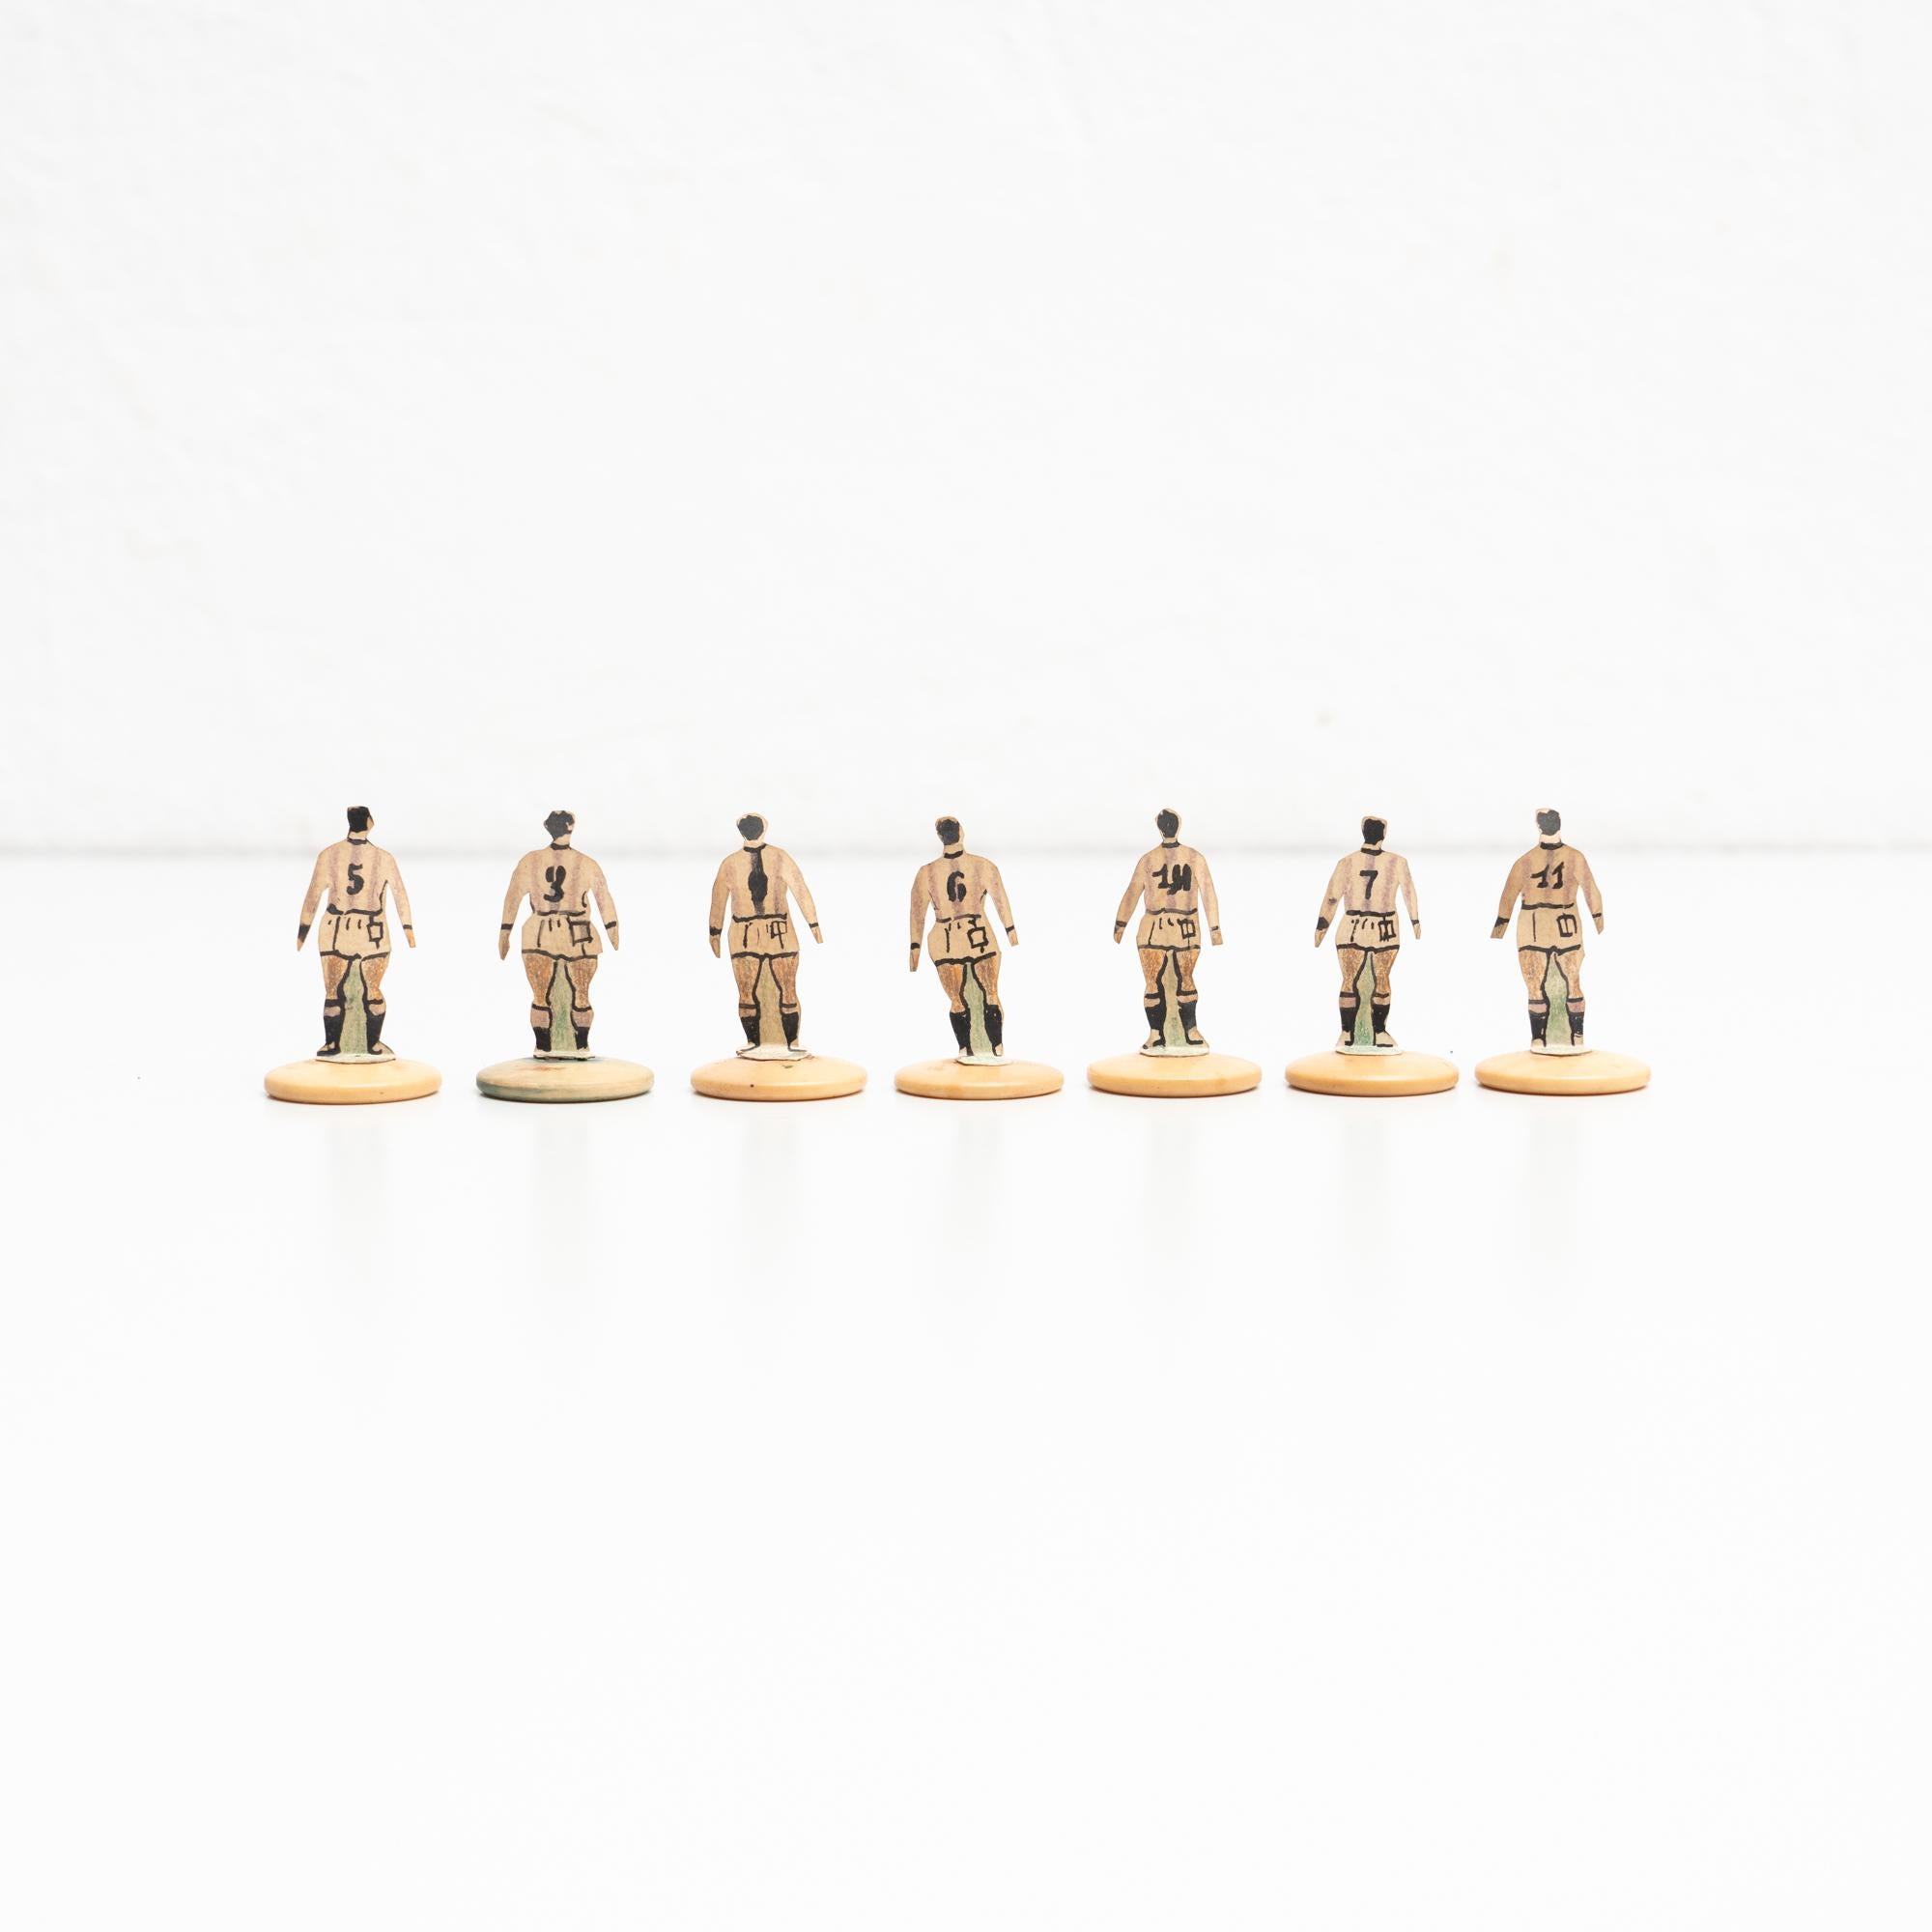 Mid-Century Modern Set of 7 Traditional Antique Button Soccer Game Figures, circa 1950 For Sale